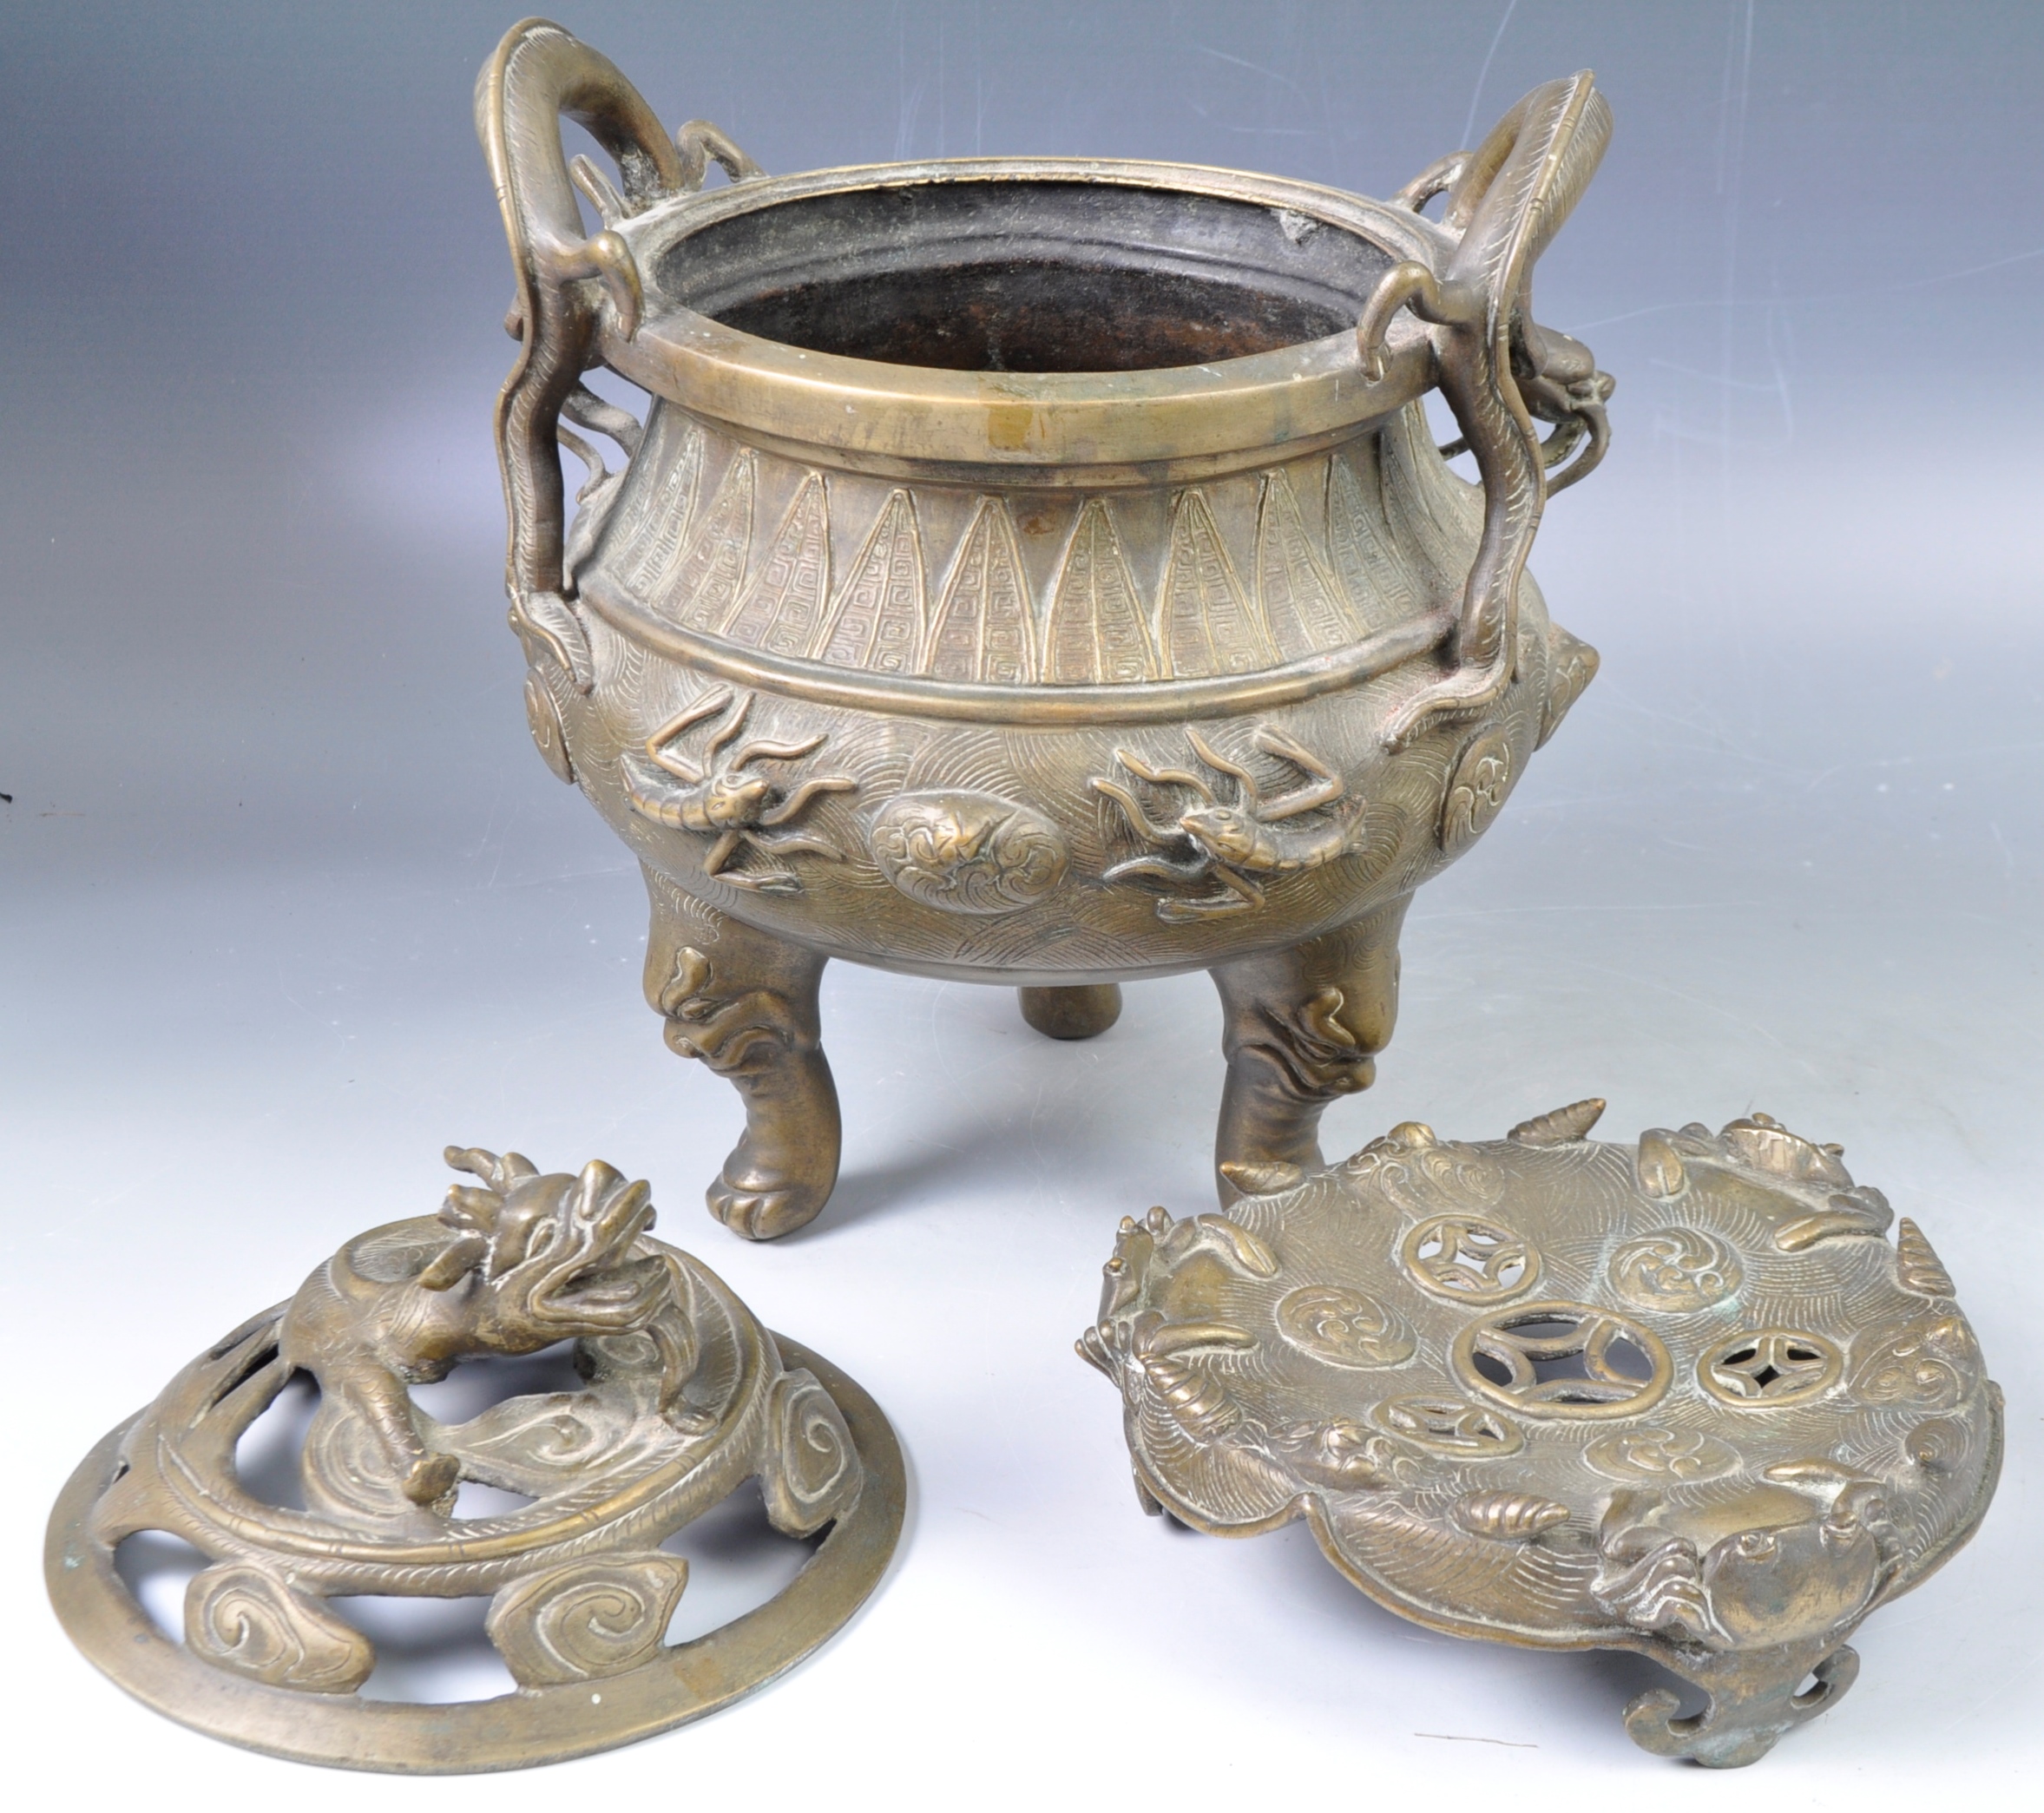 RARE 19TH CENTURY CHINESE BRONZE CENSER WITH PROVENANCE - Image 6 of 6